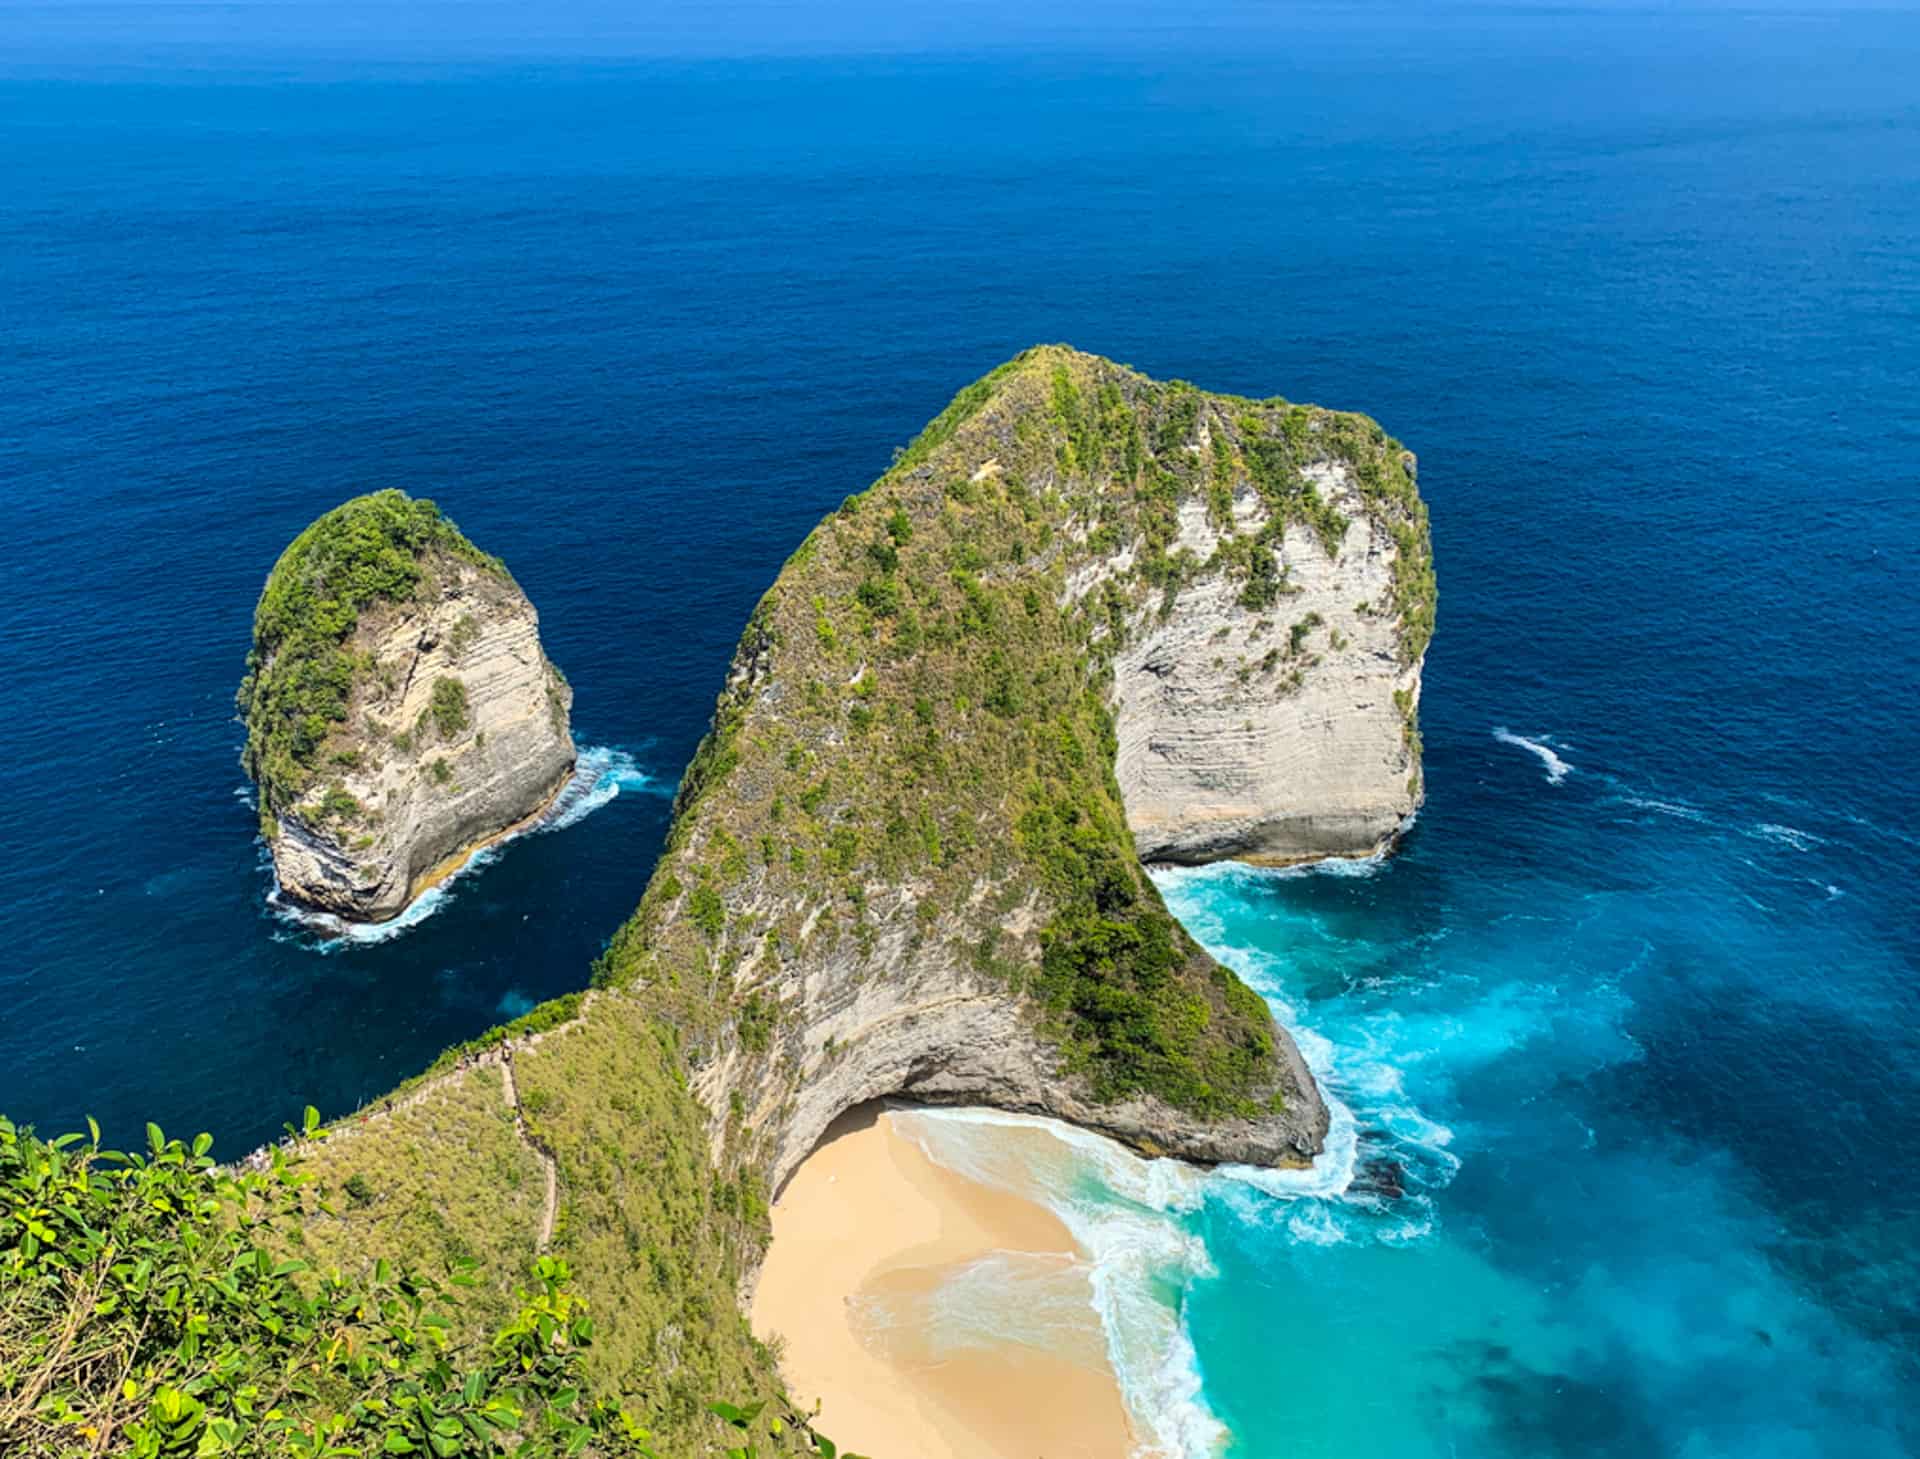 Overlooking Kelingking beach from high vantage point. Beautiful blue ocean and rock formation resembling a T-Rex dinosaur in Nusa Penida, Bali, Indonesia.